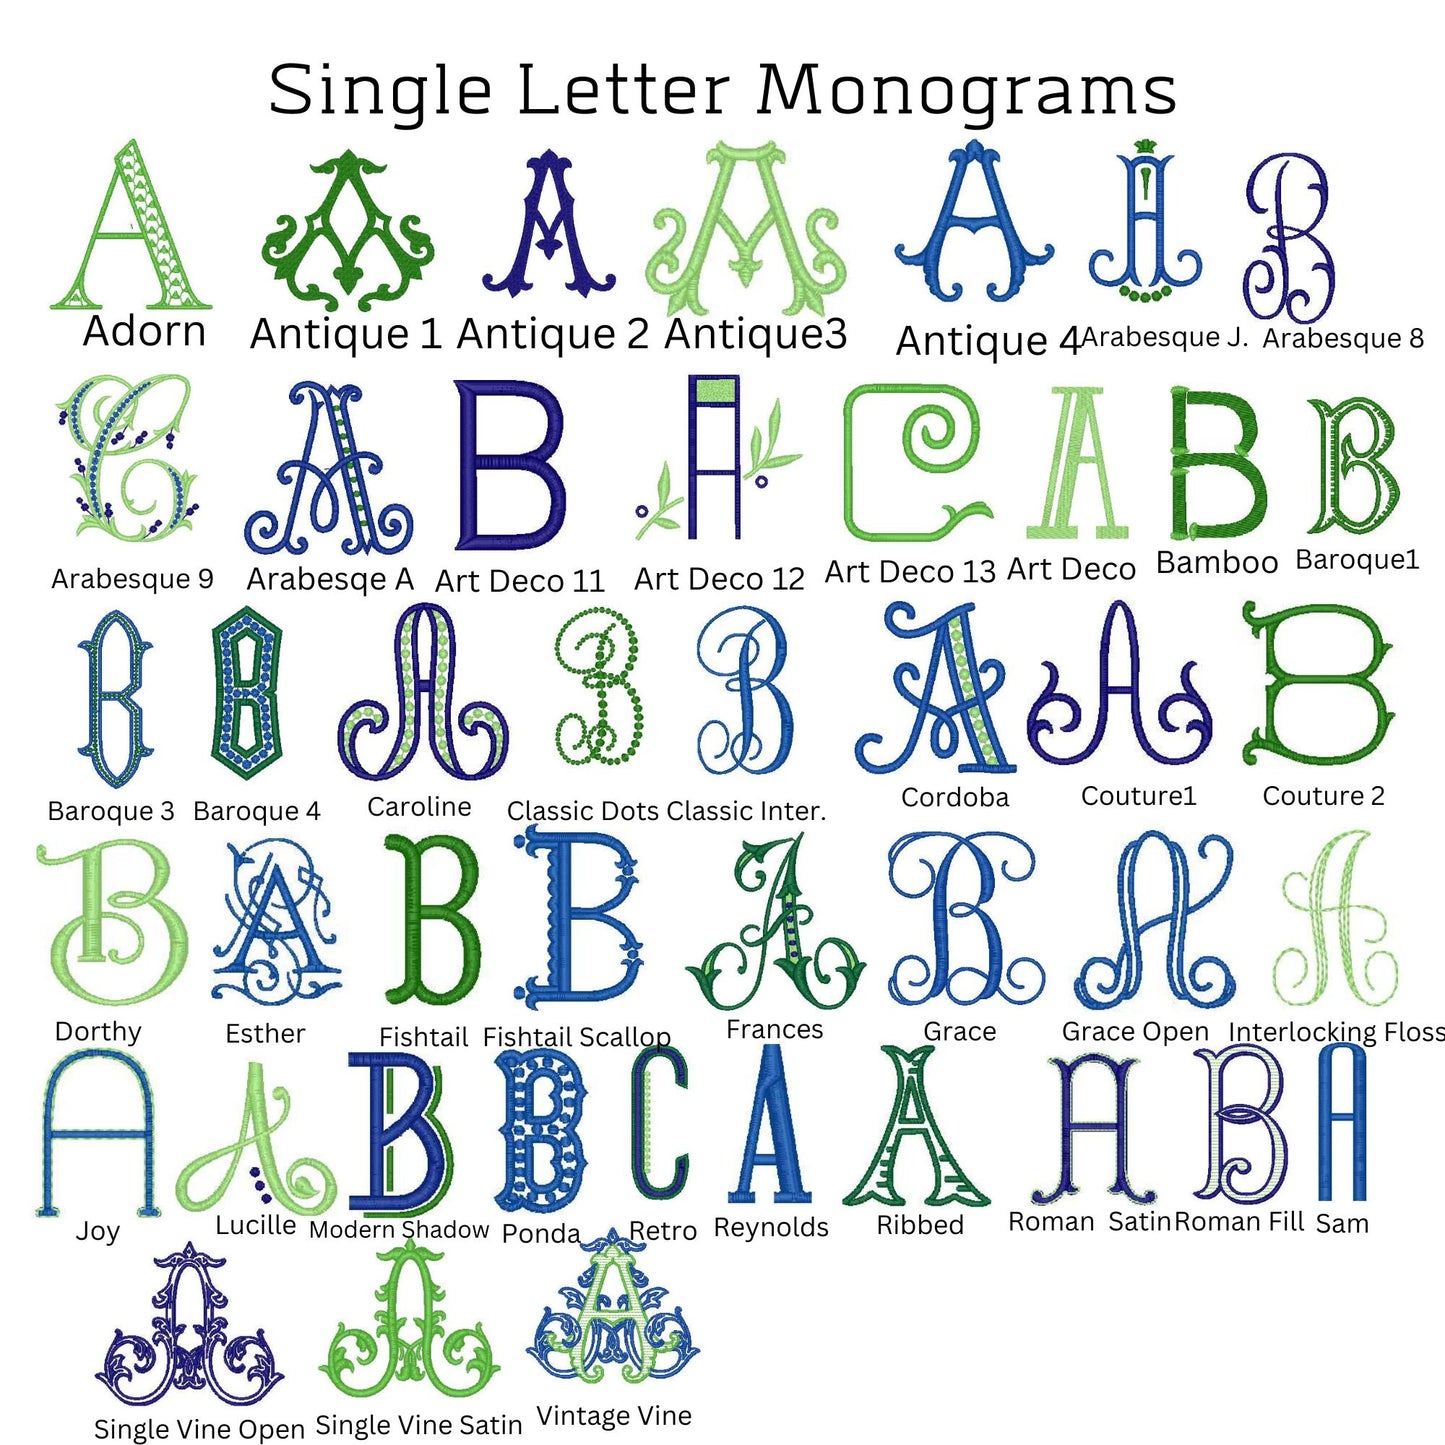 Single letter Monogrammed Cotton Hand Towel, Kitchen Towel, Guest Towel, Personalized Hand Towel